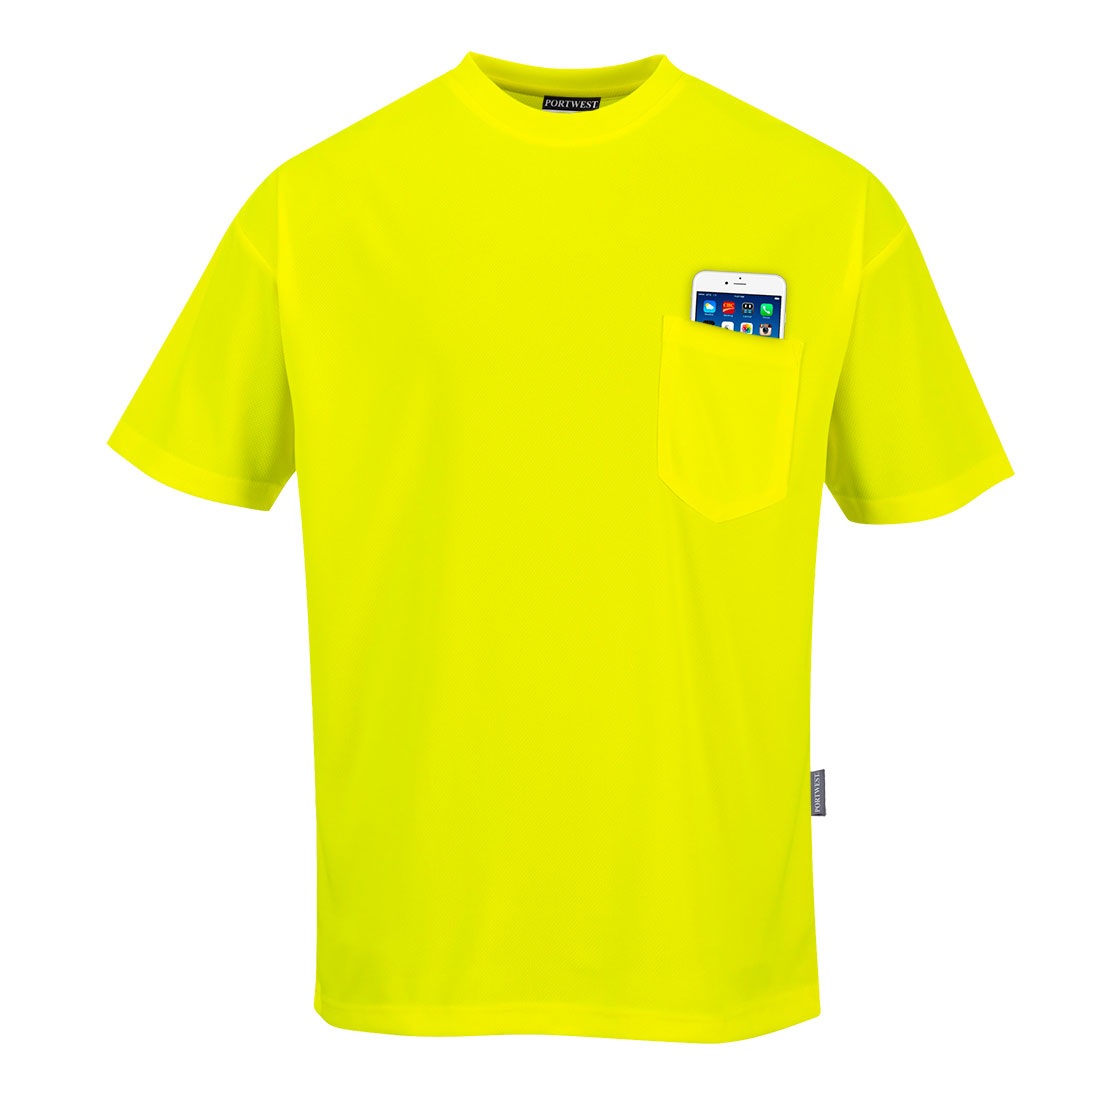 Workwear, T-Shirts, Polos and Shirts